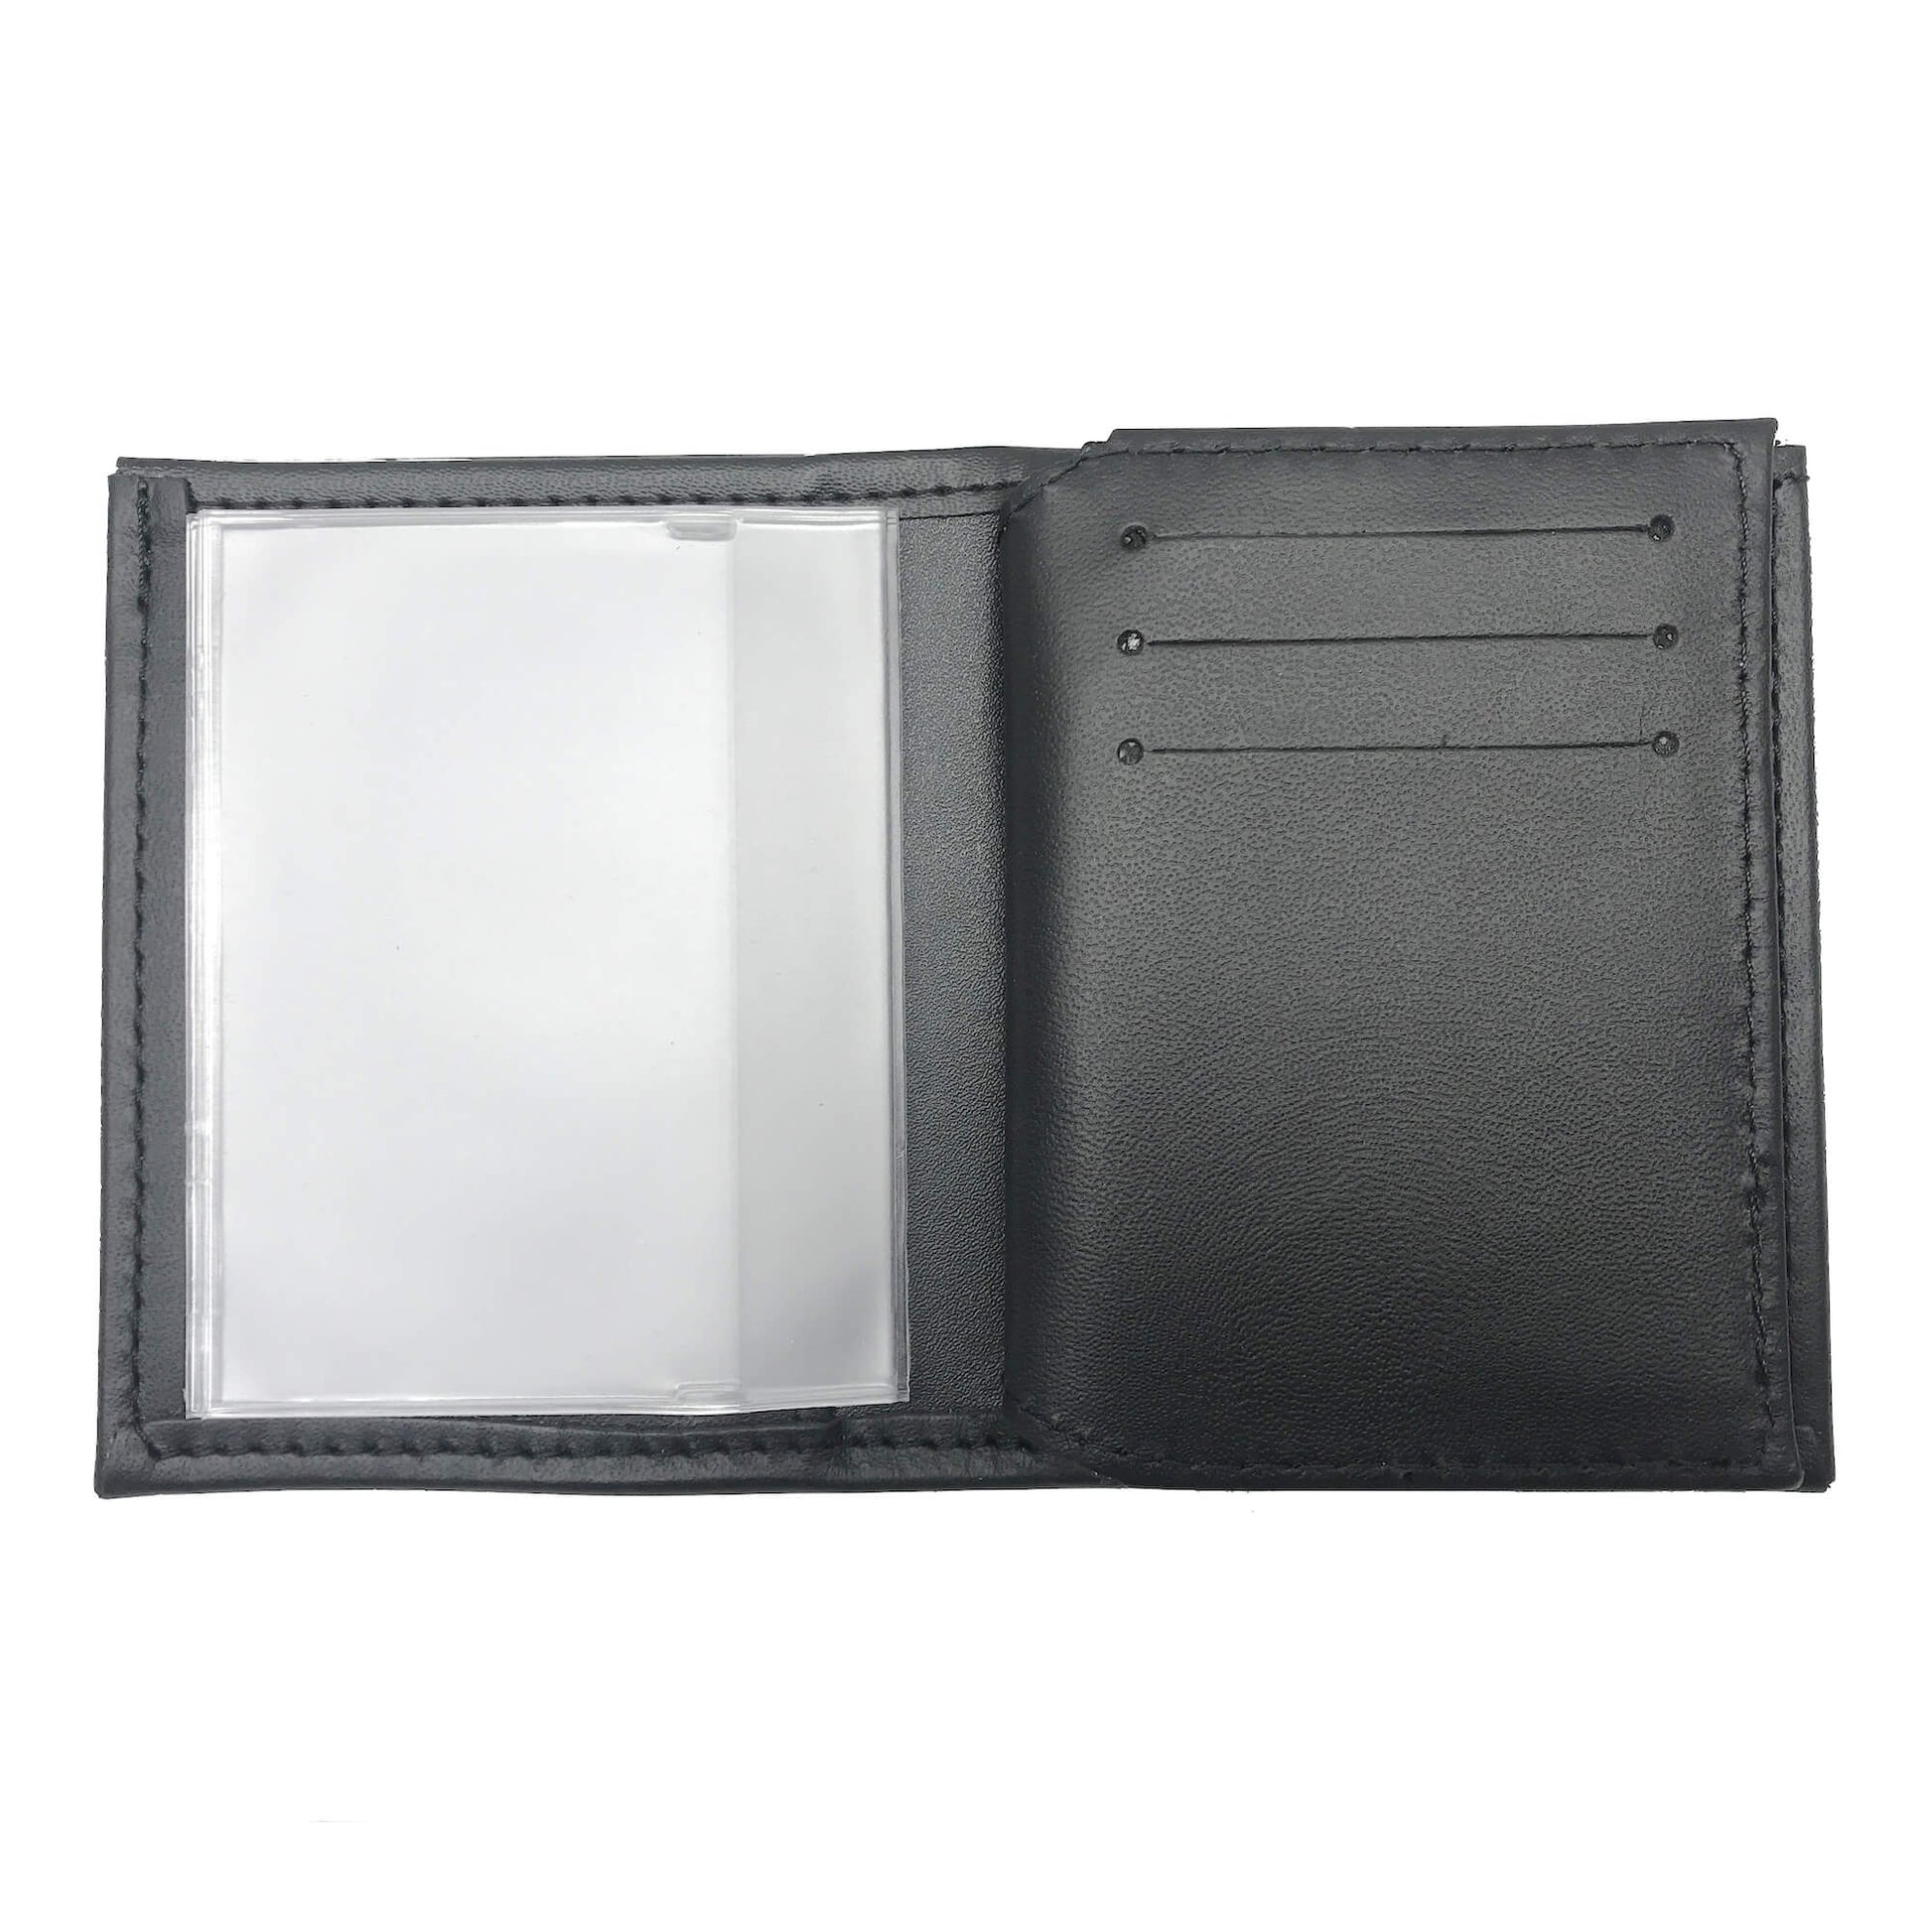 San Diego County Sheriff's Dept. Bifold Hidden Badge Wallet-Perfect Fit-911 Duty Gear USA